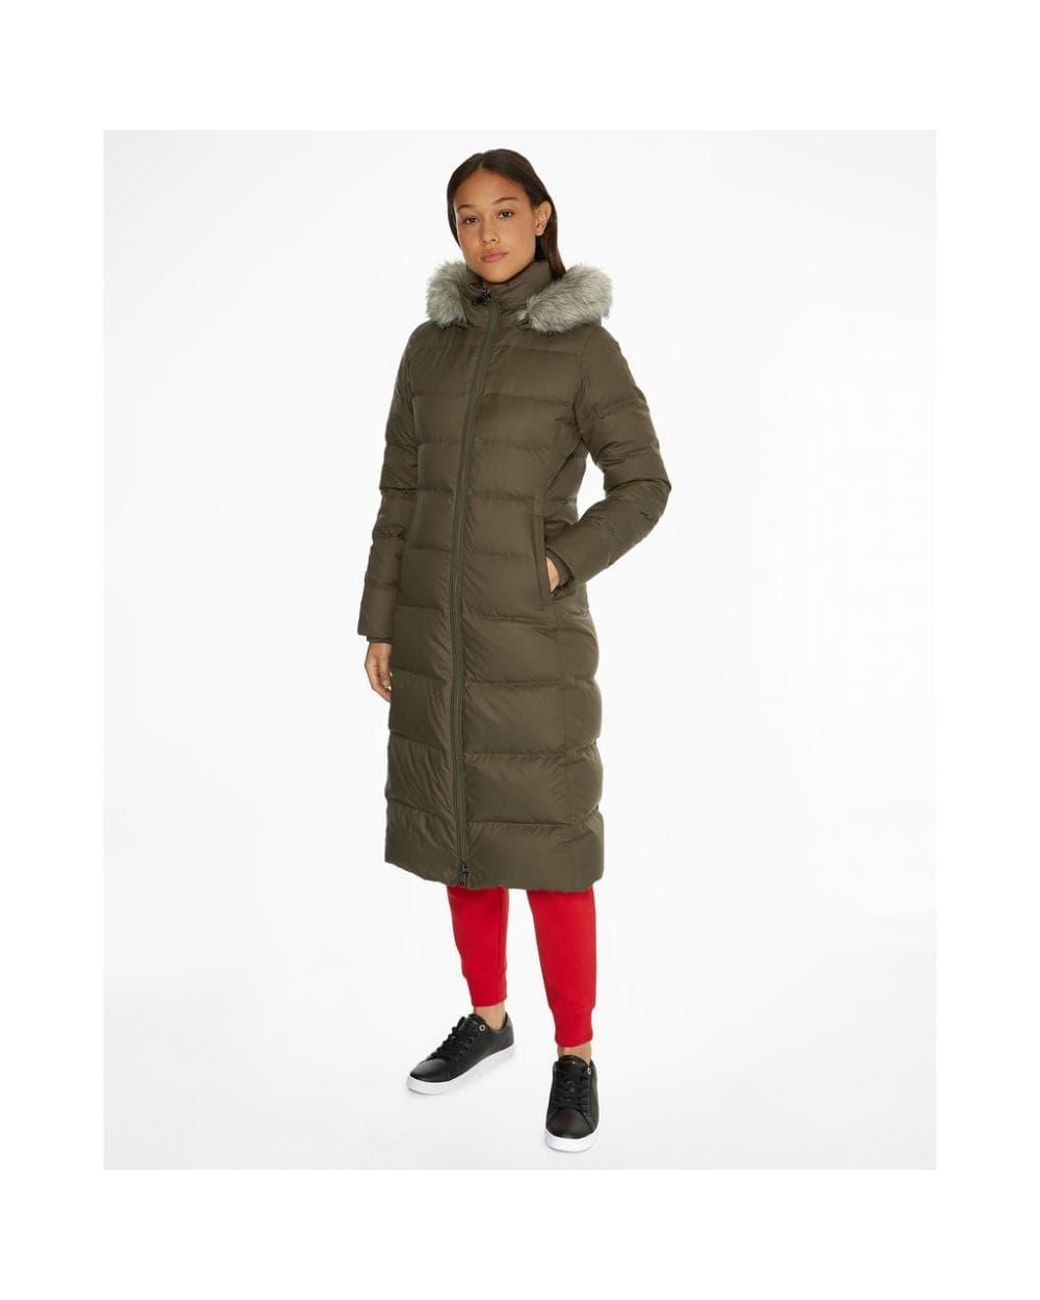 Tommy Hilfiger Tyra Maxi Faux Fur Down Jacket in Green | Lyst